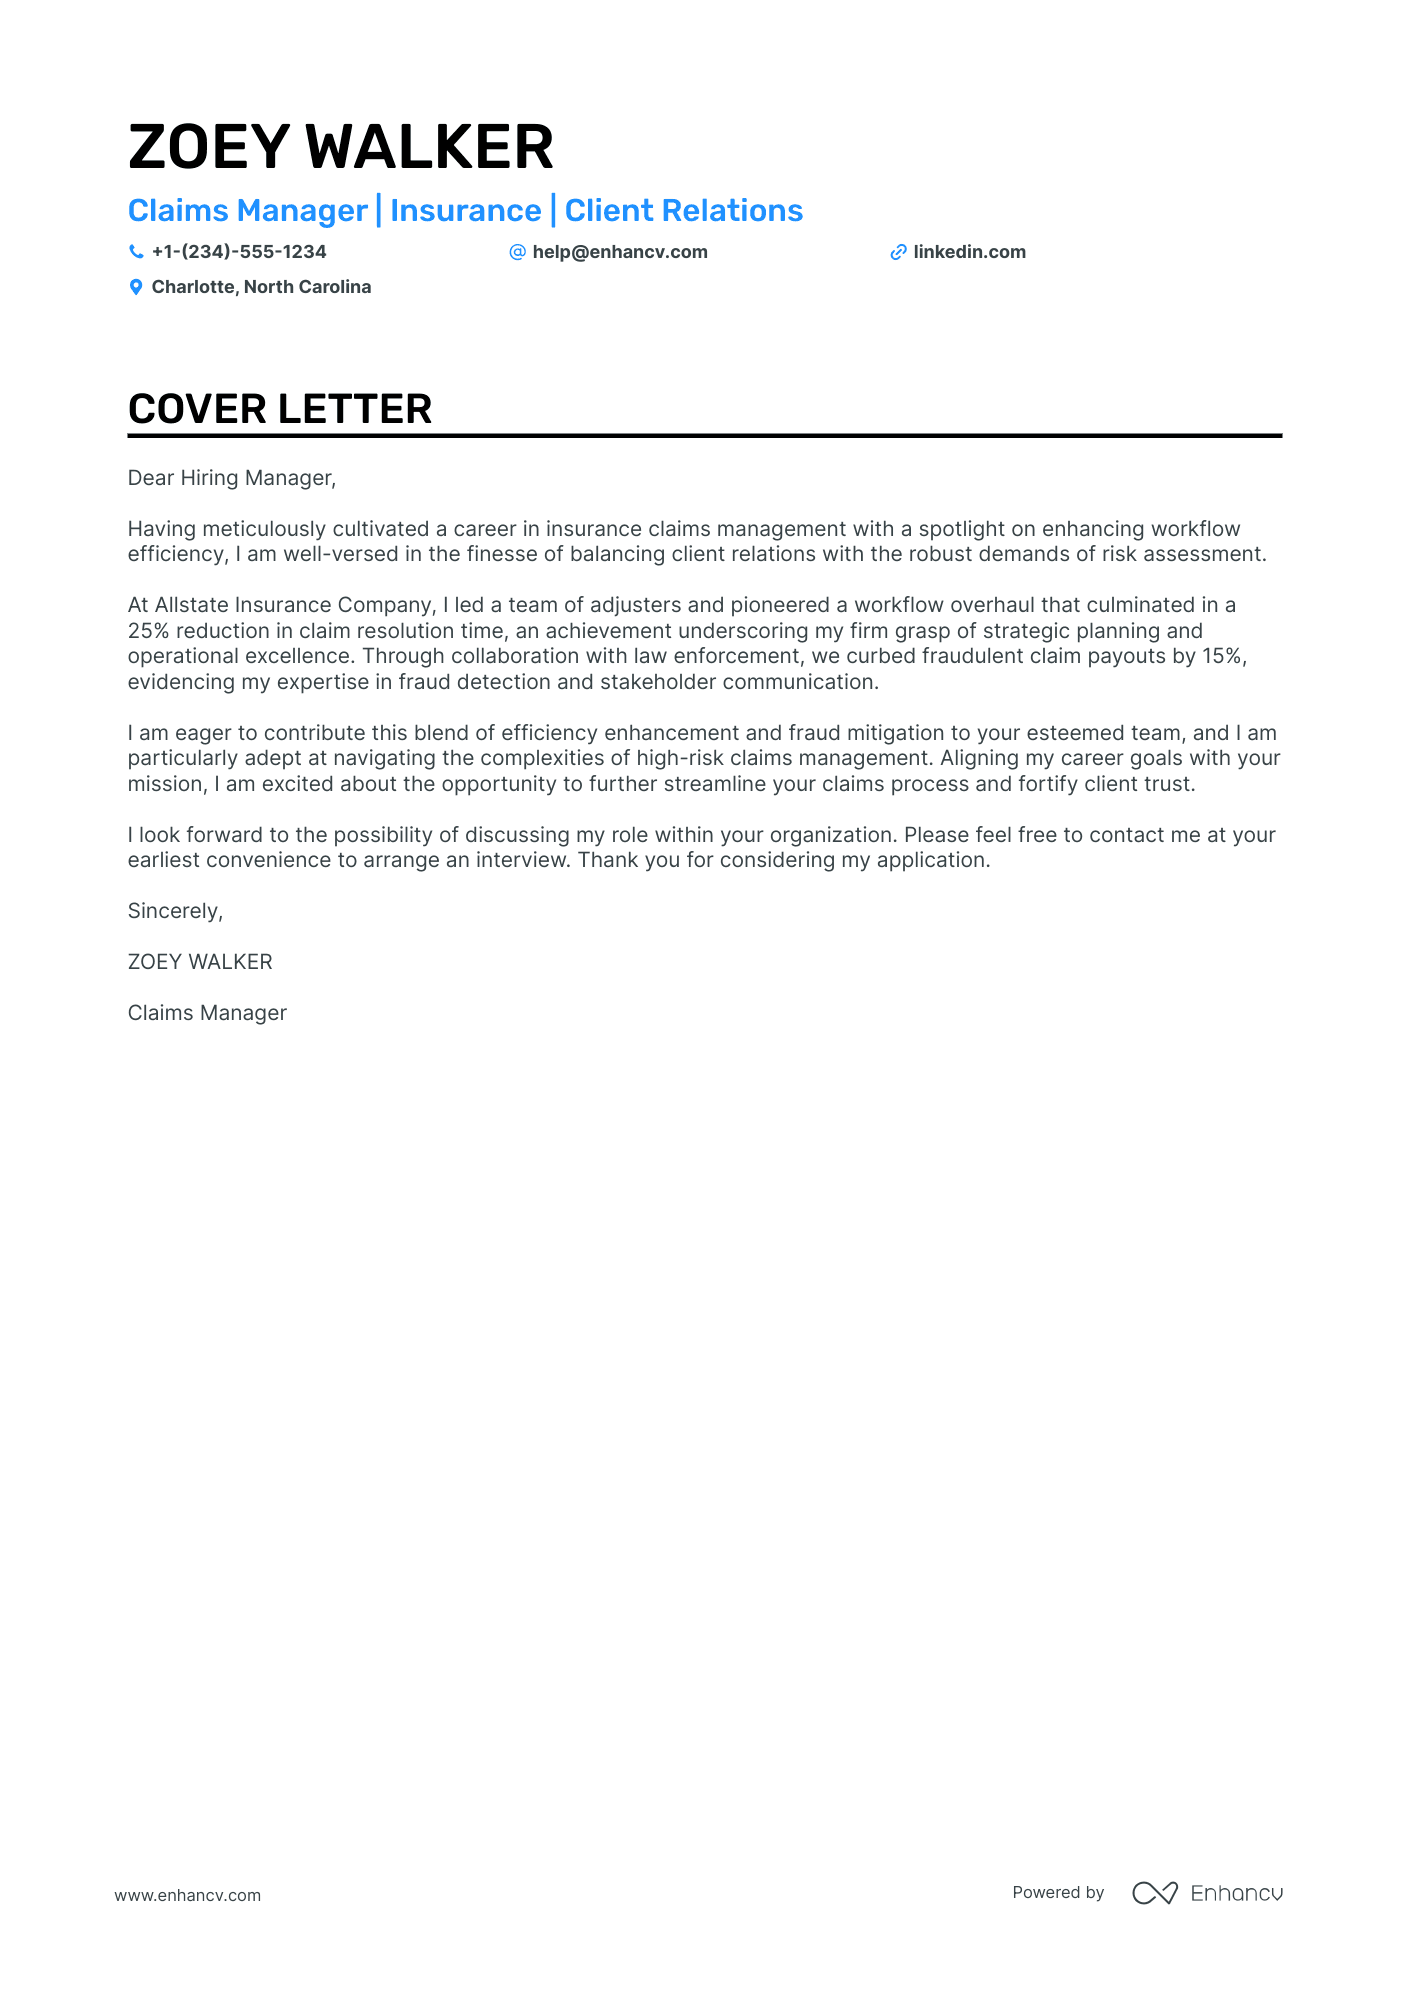 Claims Manager cover letter